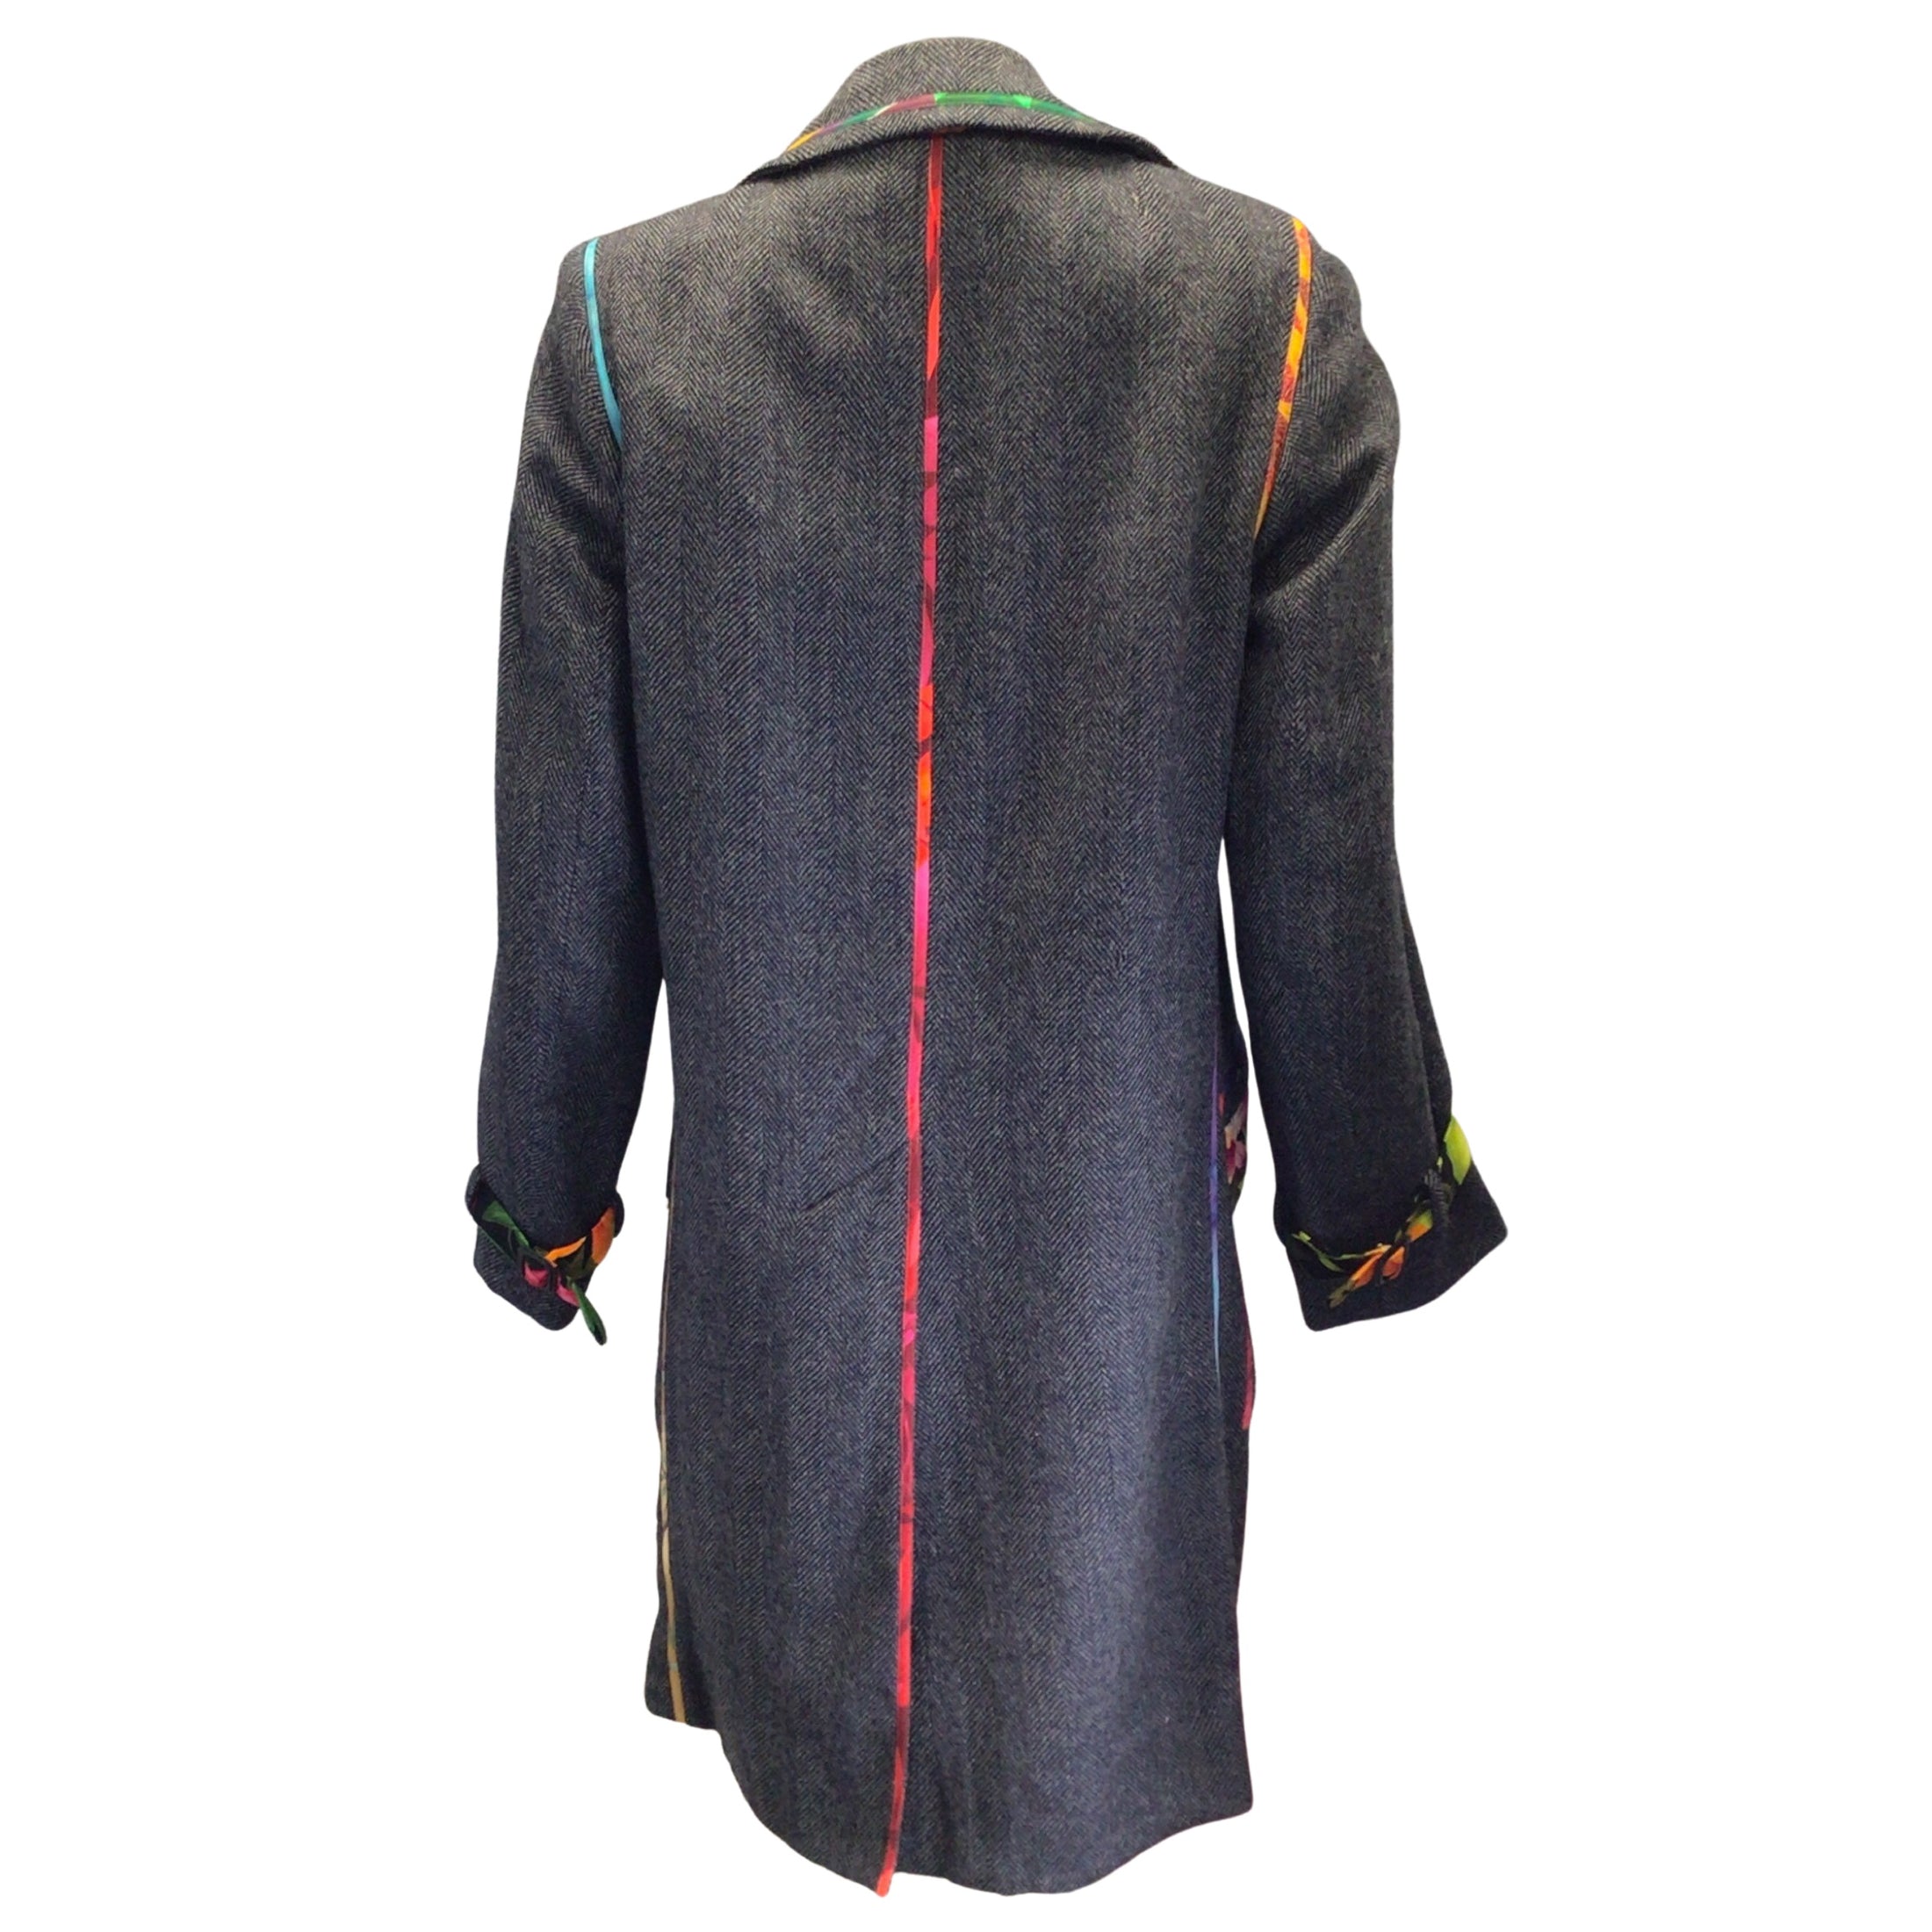 Tracy Feith Charcoal Grey Multi Floral Printed Trimmed Wool Tweed Coat